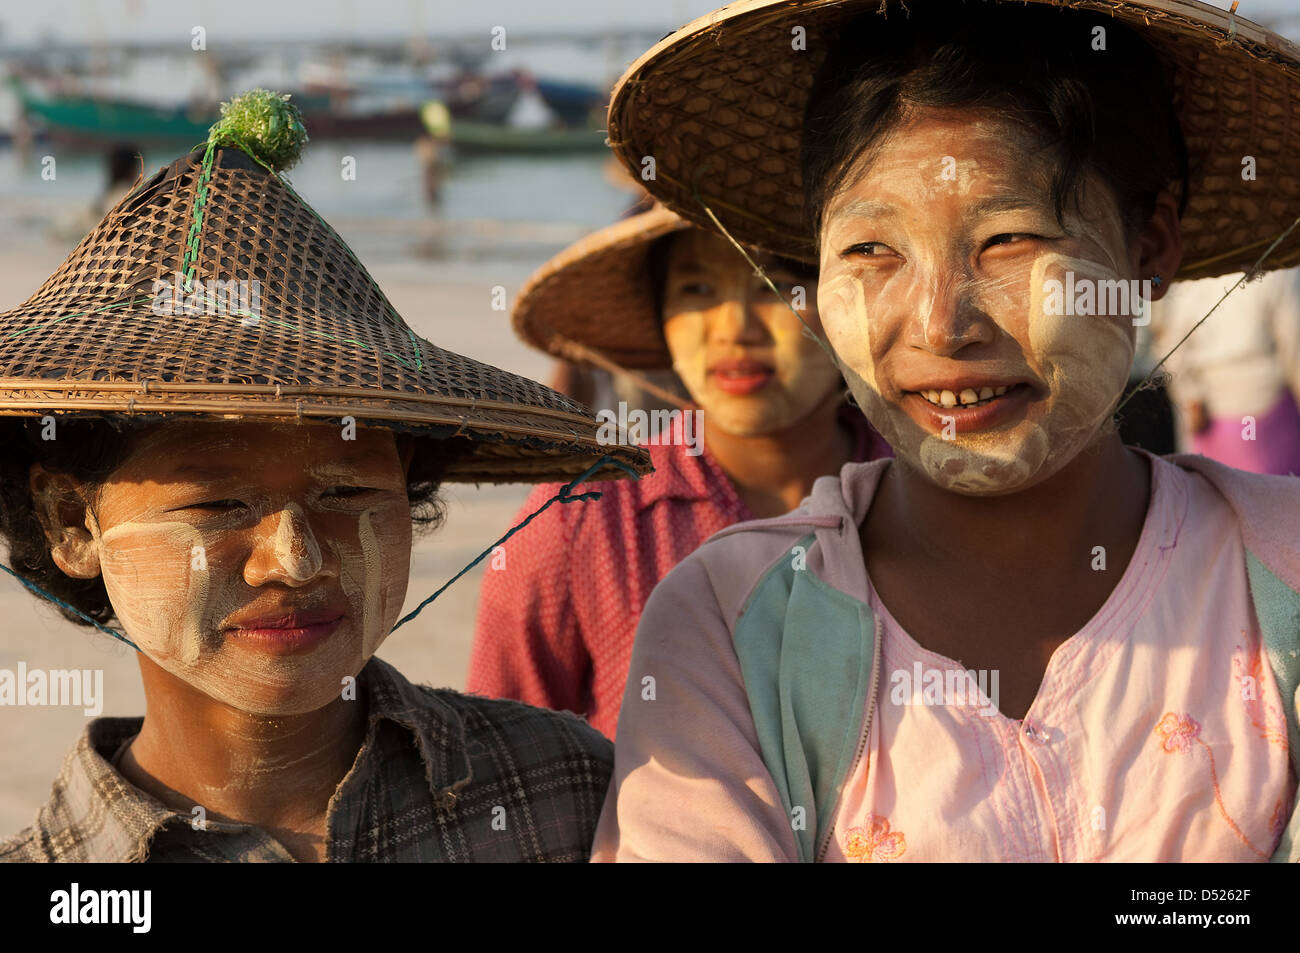 These young Burmese women have, as is common, rubbed paste from thanaka bark on their faces to protect them from the fierce sun. Stock Photo